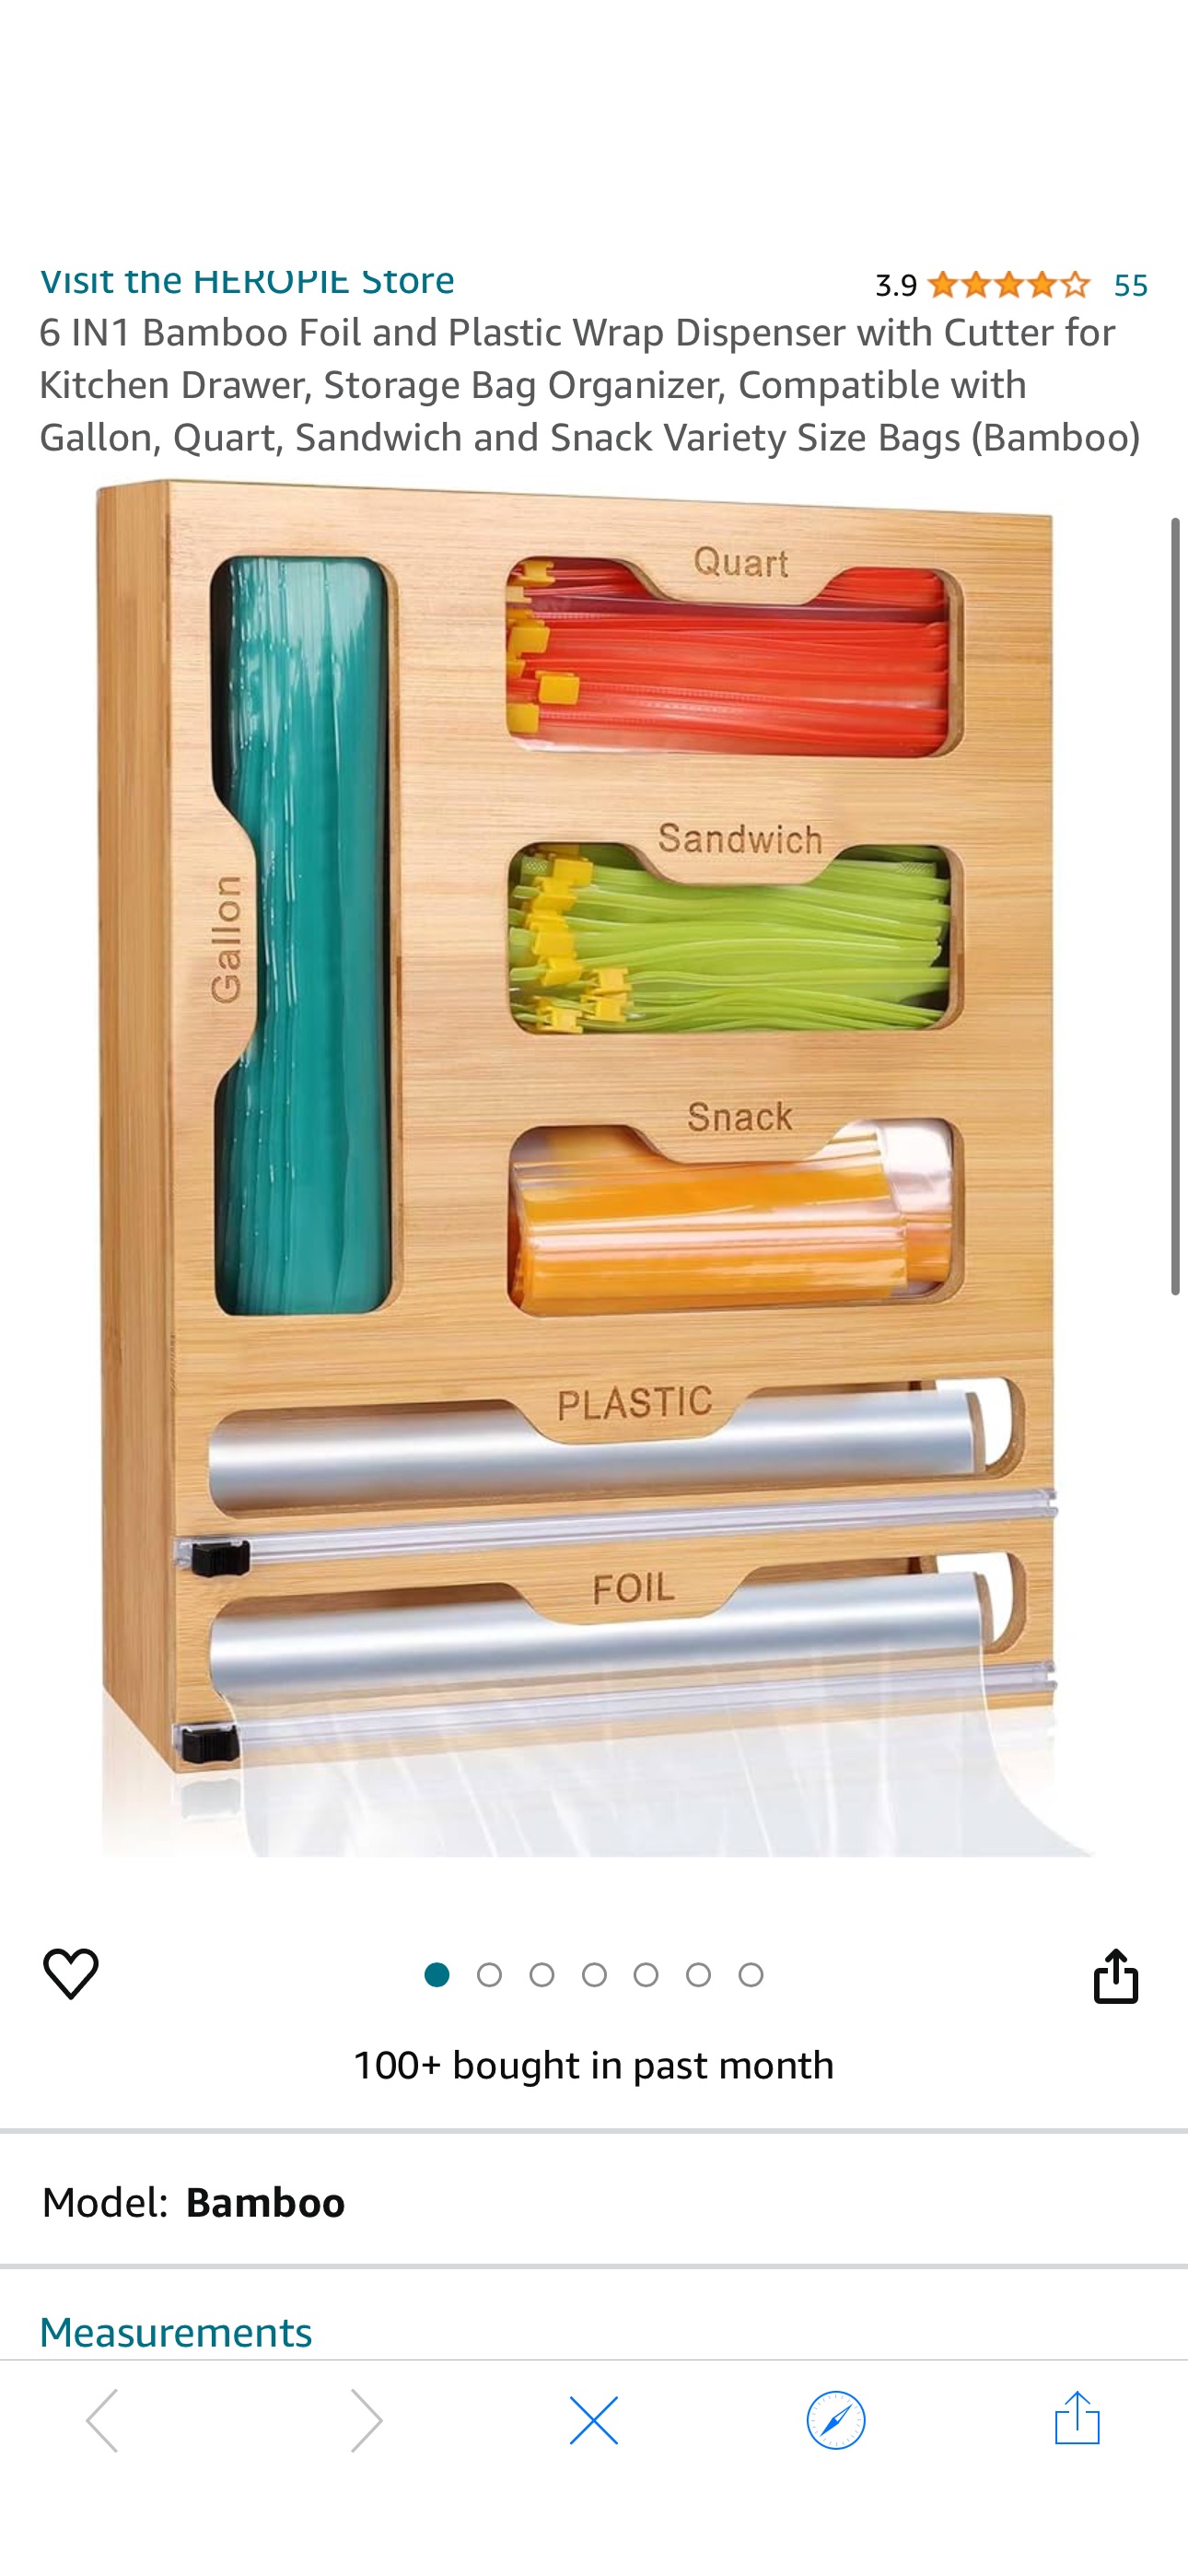 Amazon.com: HEROPIE 6 IN1 Bamboo Foil and Plastic Wrap Dispenser with Cutter for Kitchen Drawer, Storage Bag Organizer, Compatible with Gallon, Quart, Sandwich and Snack Variety Size Bags (Bamboo): Ho